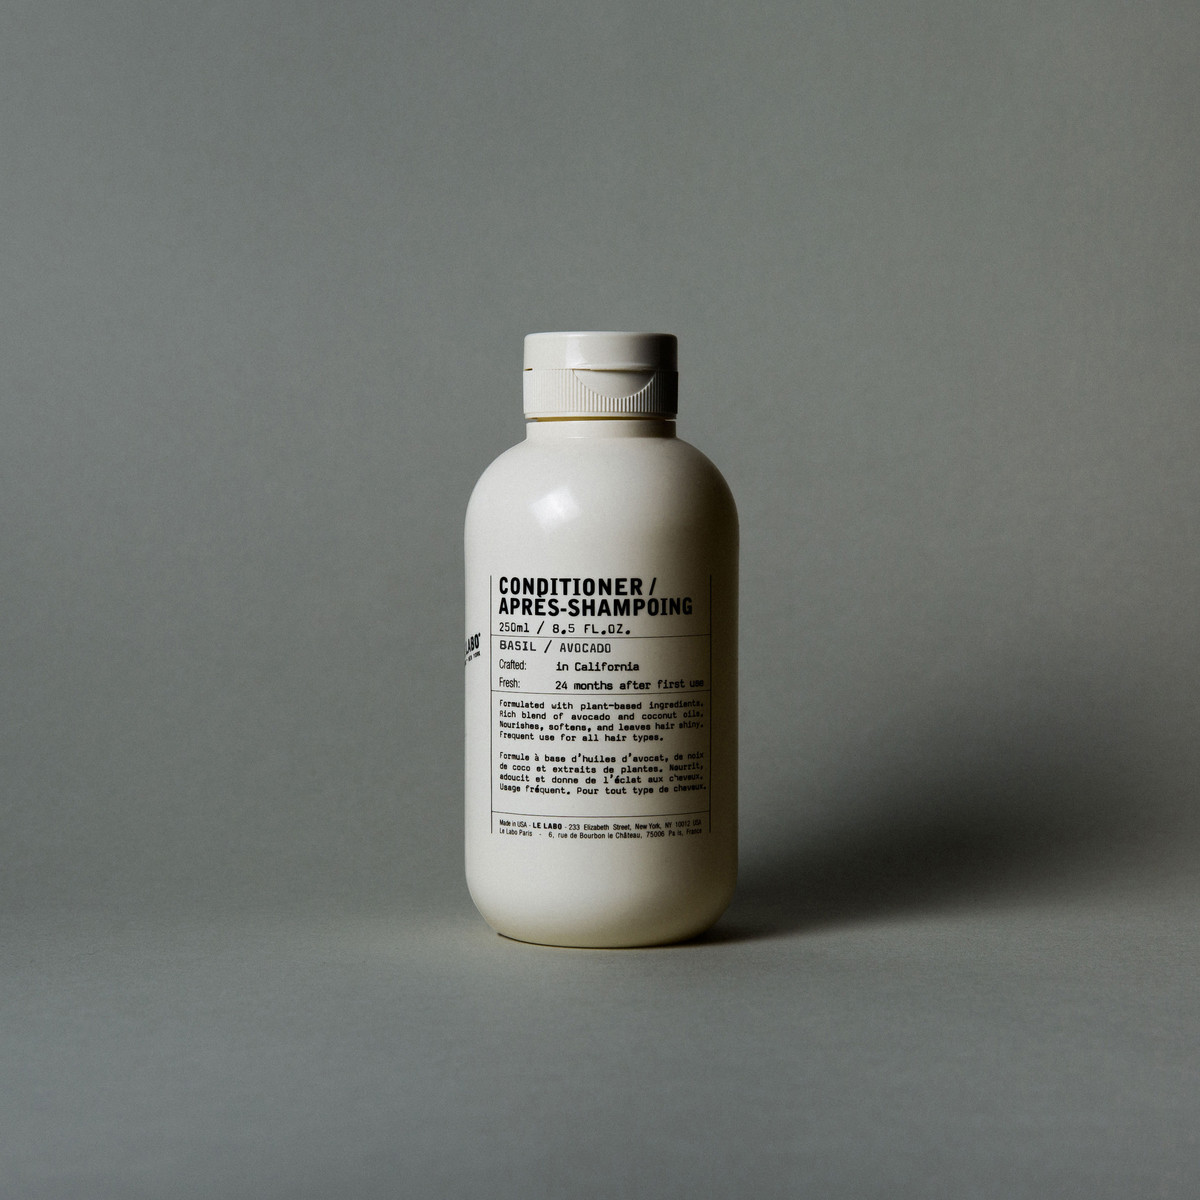 Le Labo Add More Plant Based Goodies To Their Skincare Line